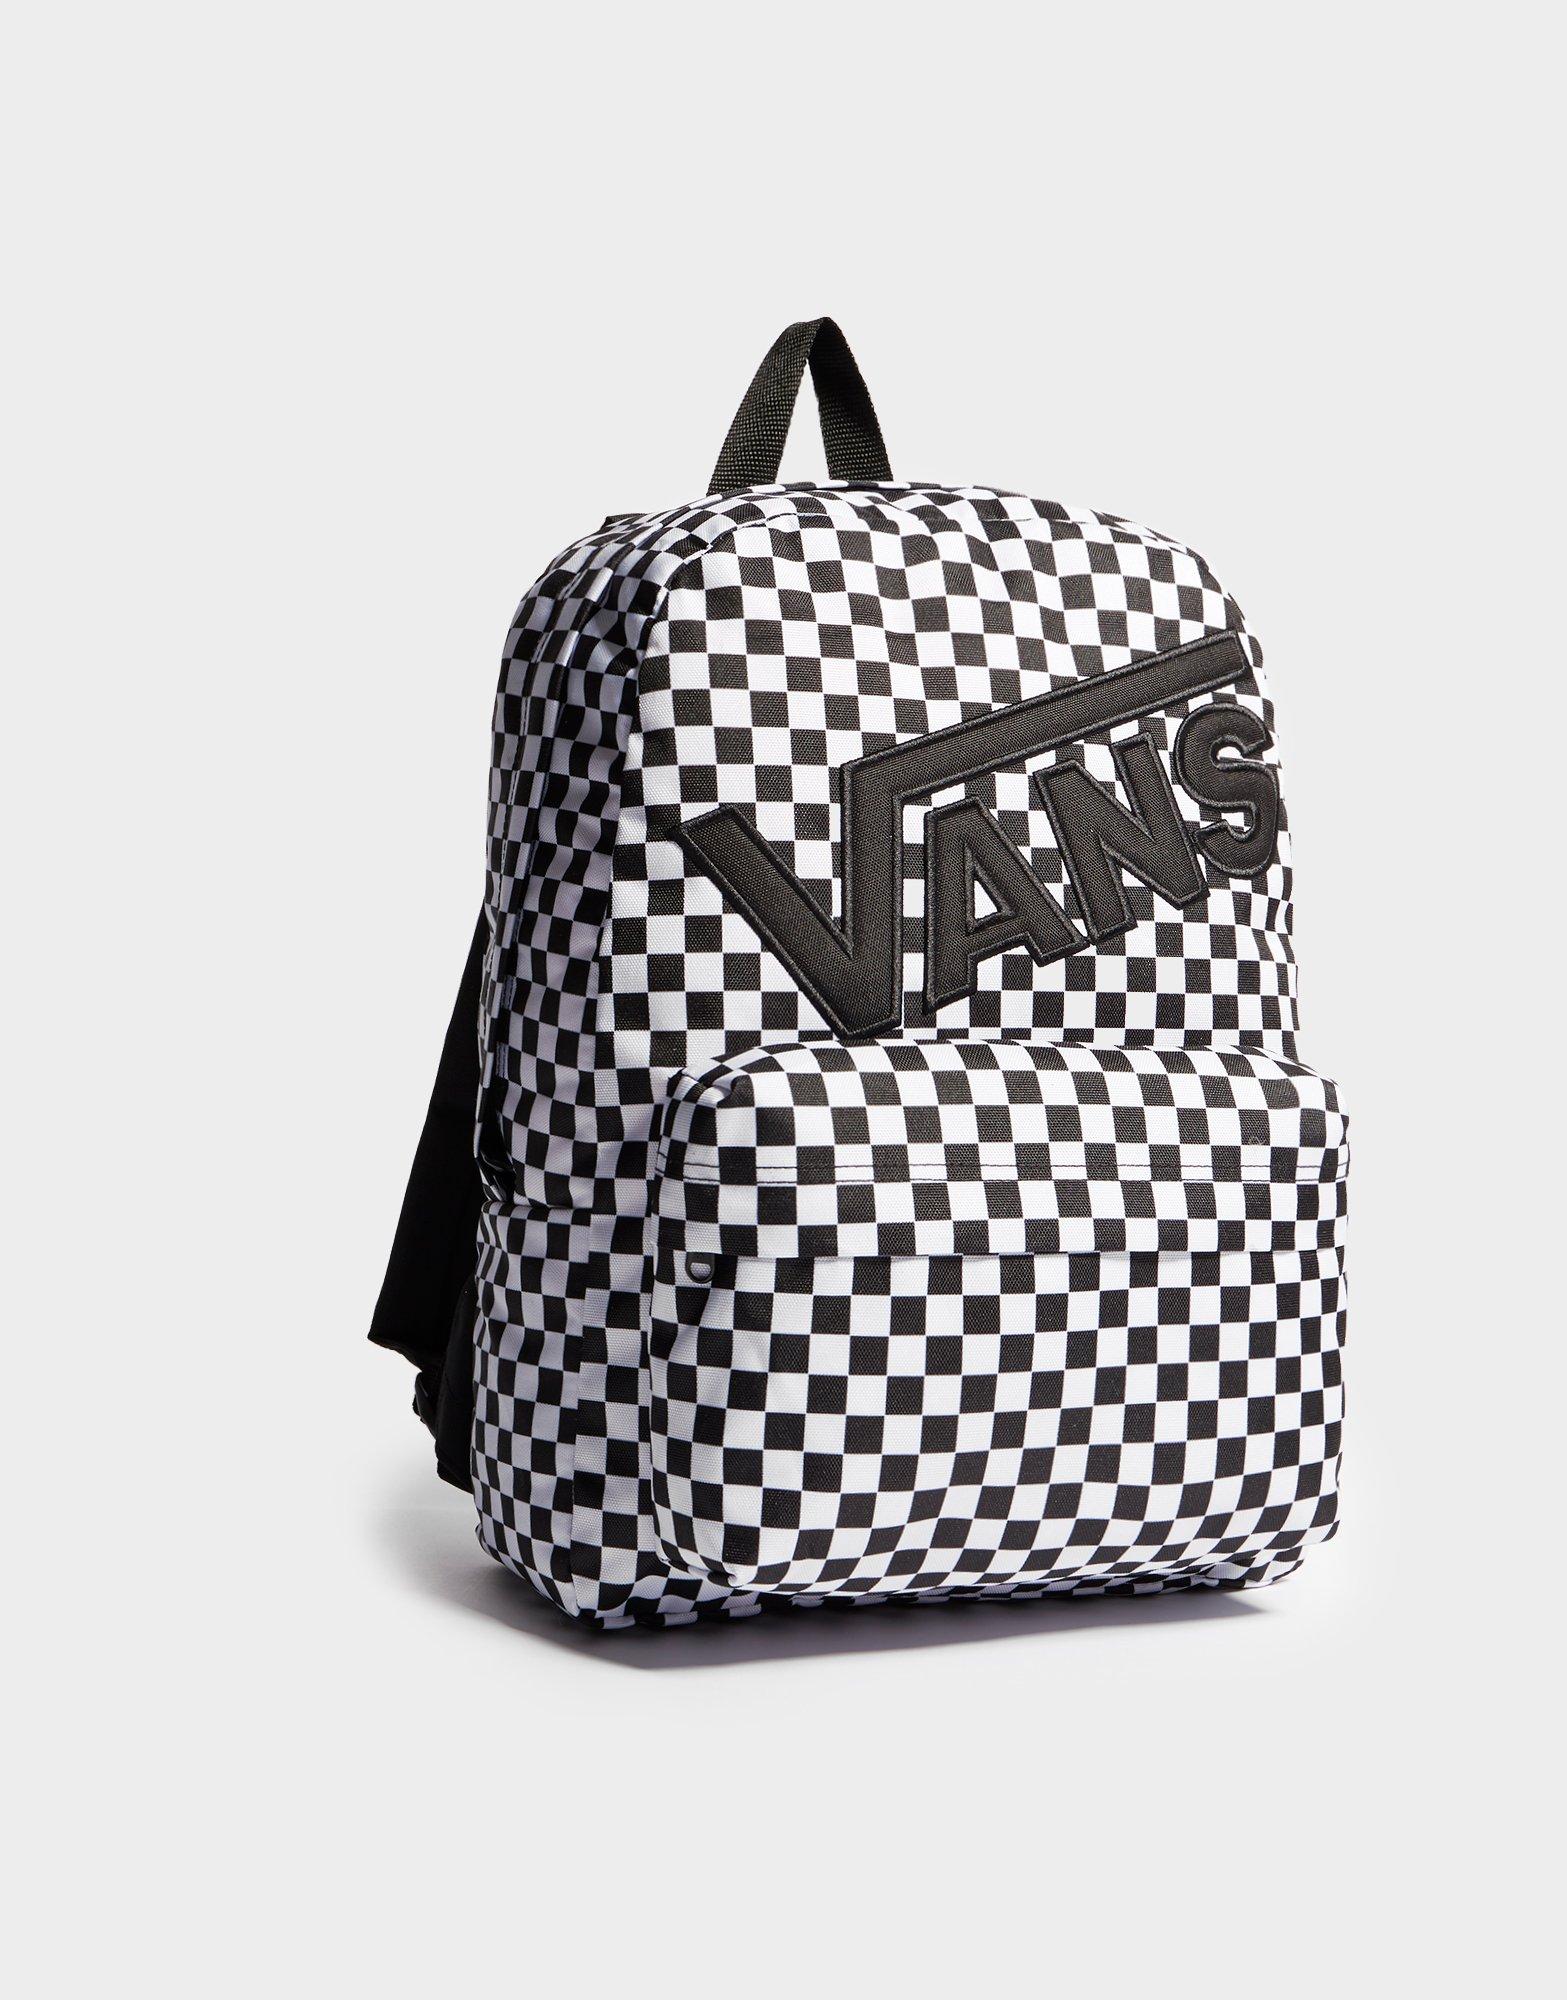 create your own vans backpack